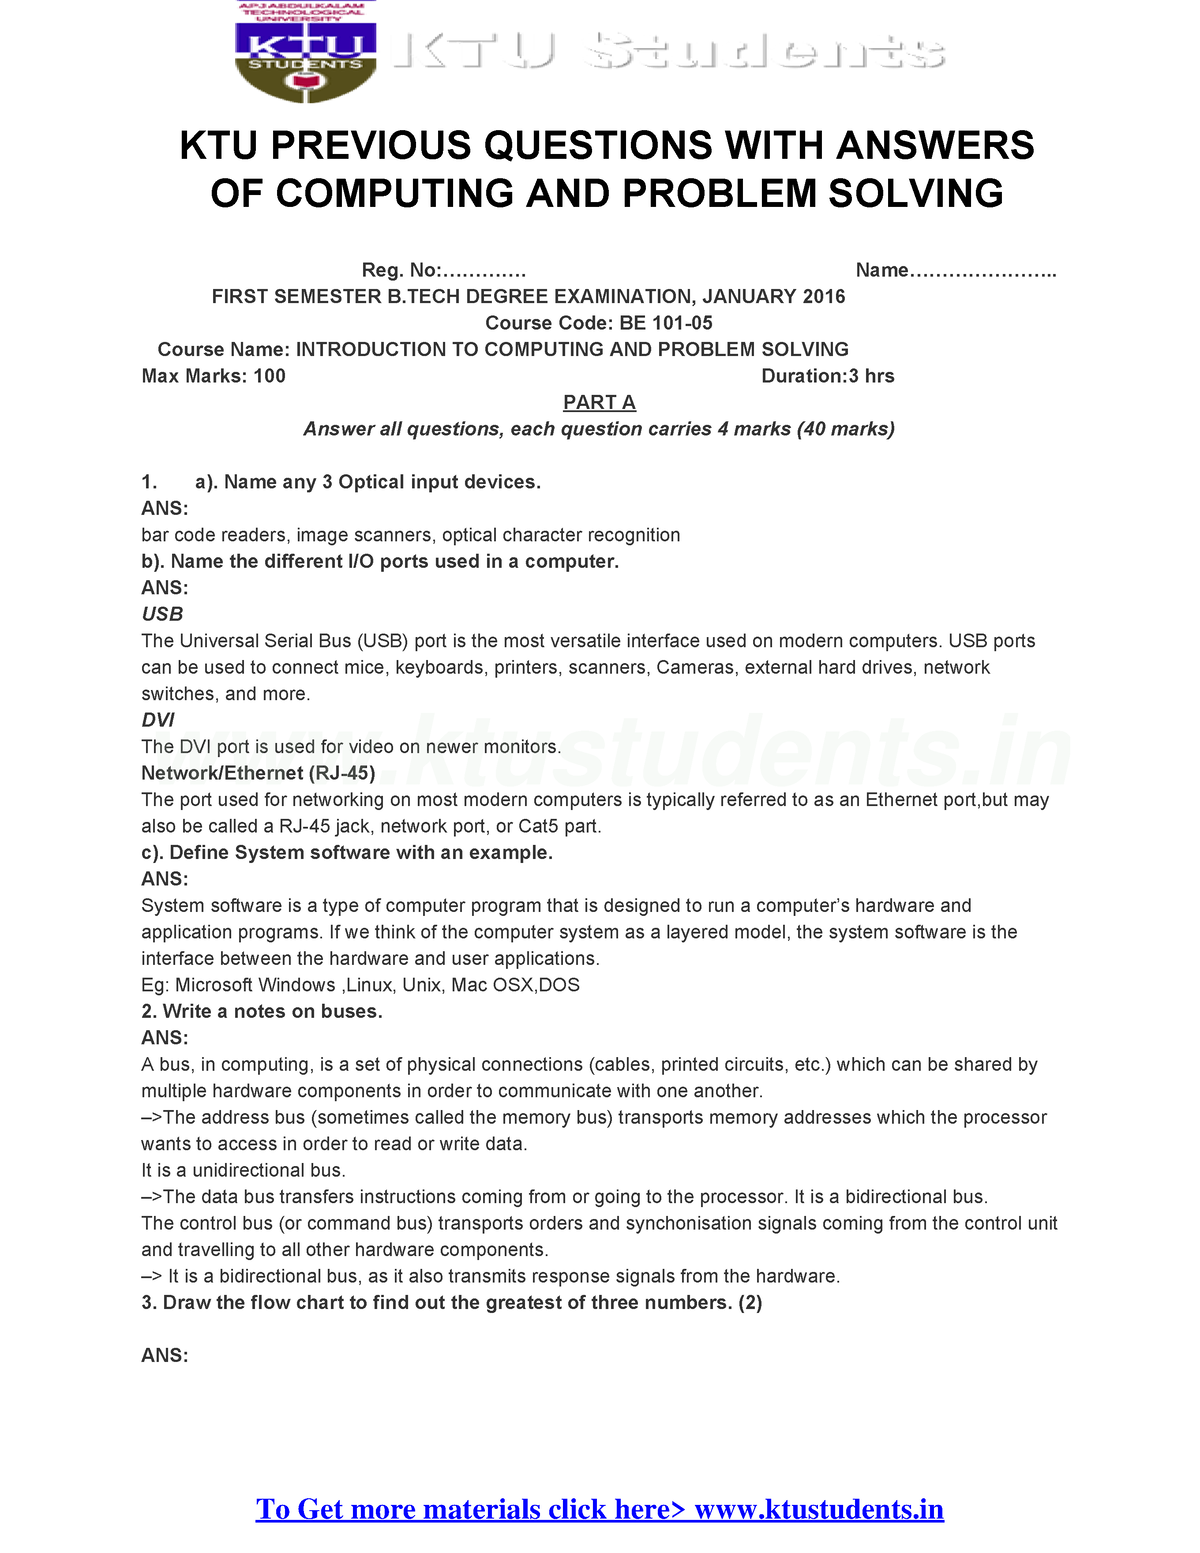 be101 05 introduction to computing and problem solving syllabus